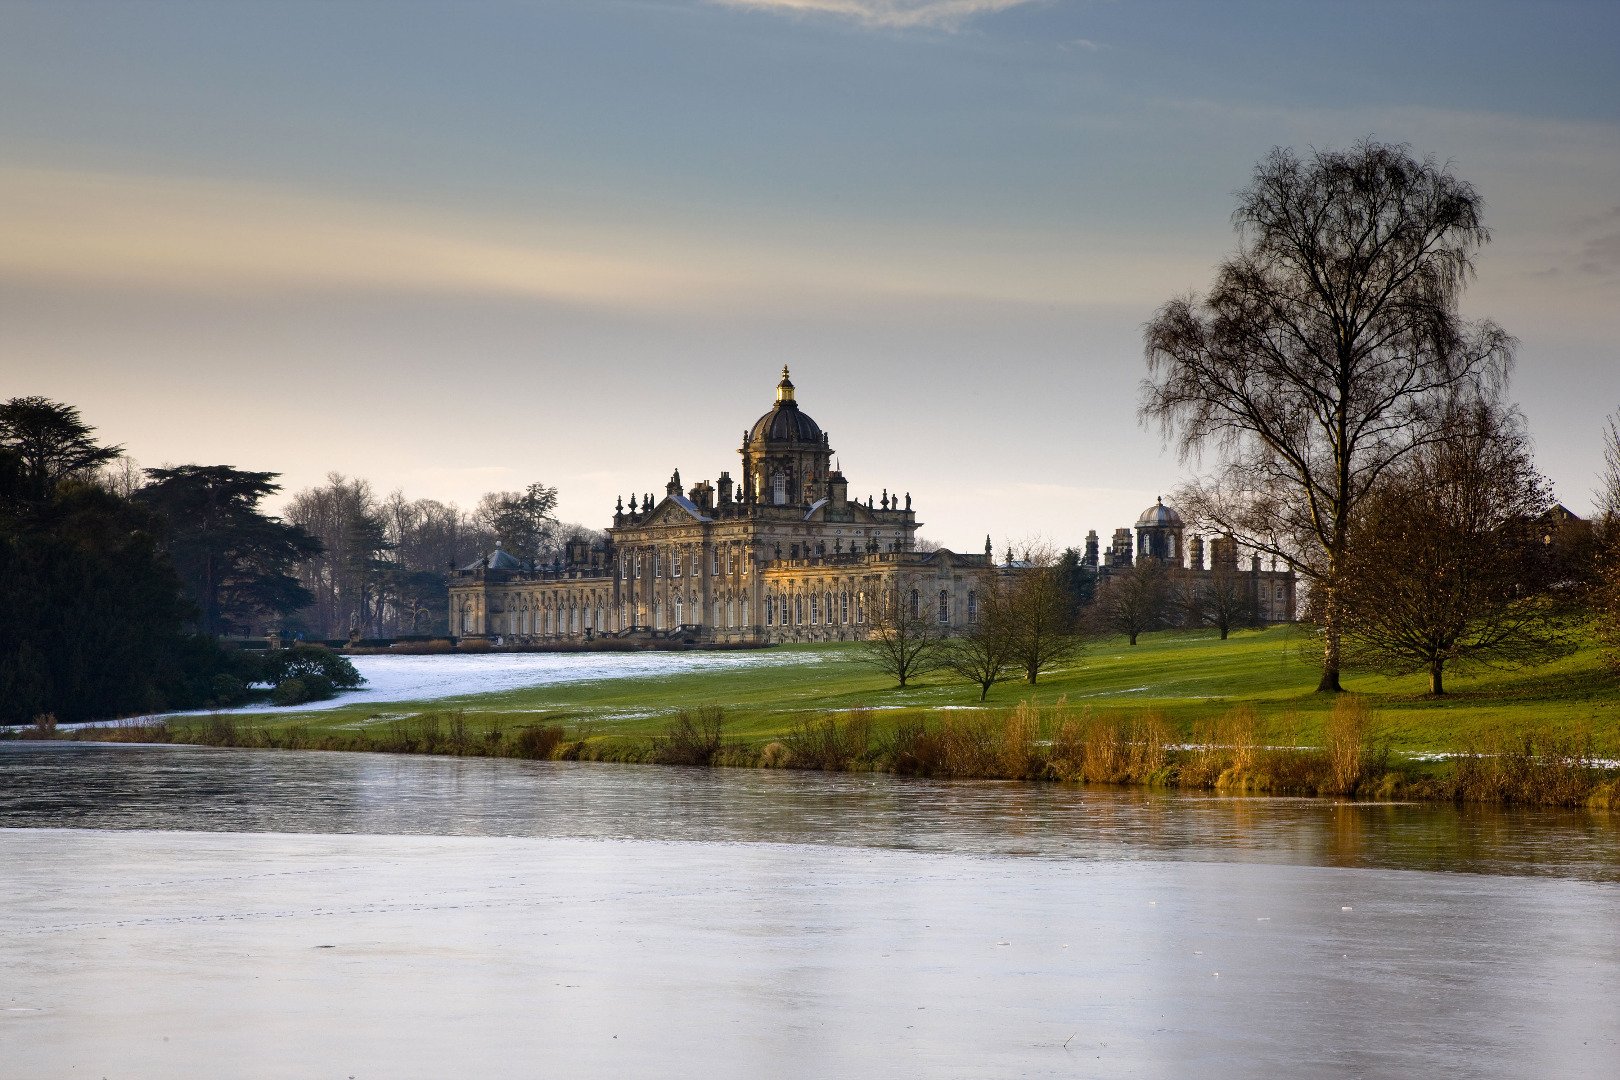 Image name castle howard and south lake mike kipling the 13 image from the post Yorkshire Stately Homes and Gardens in Yorkshire.com.